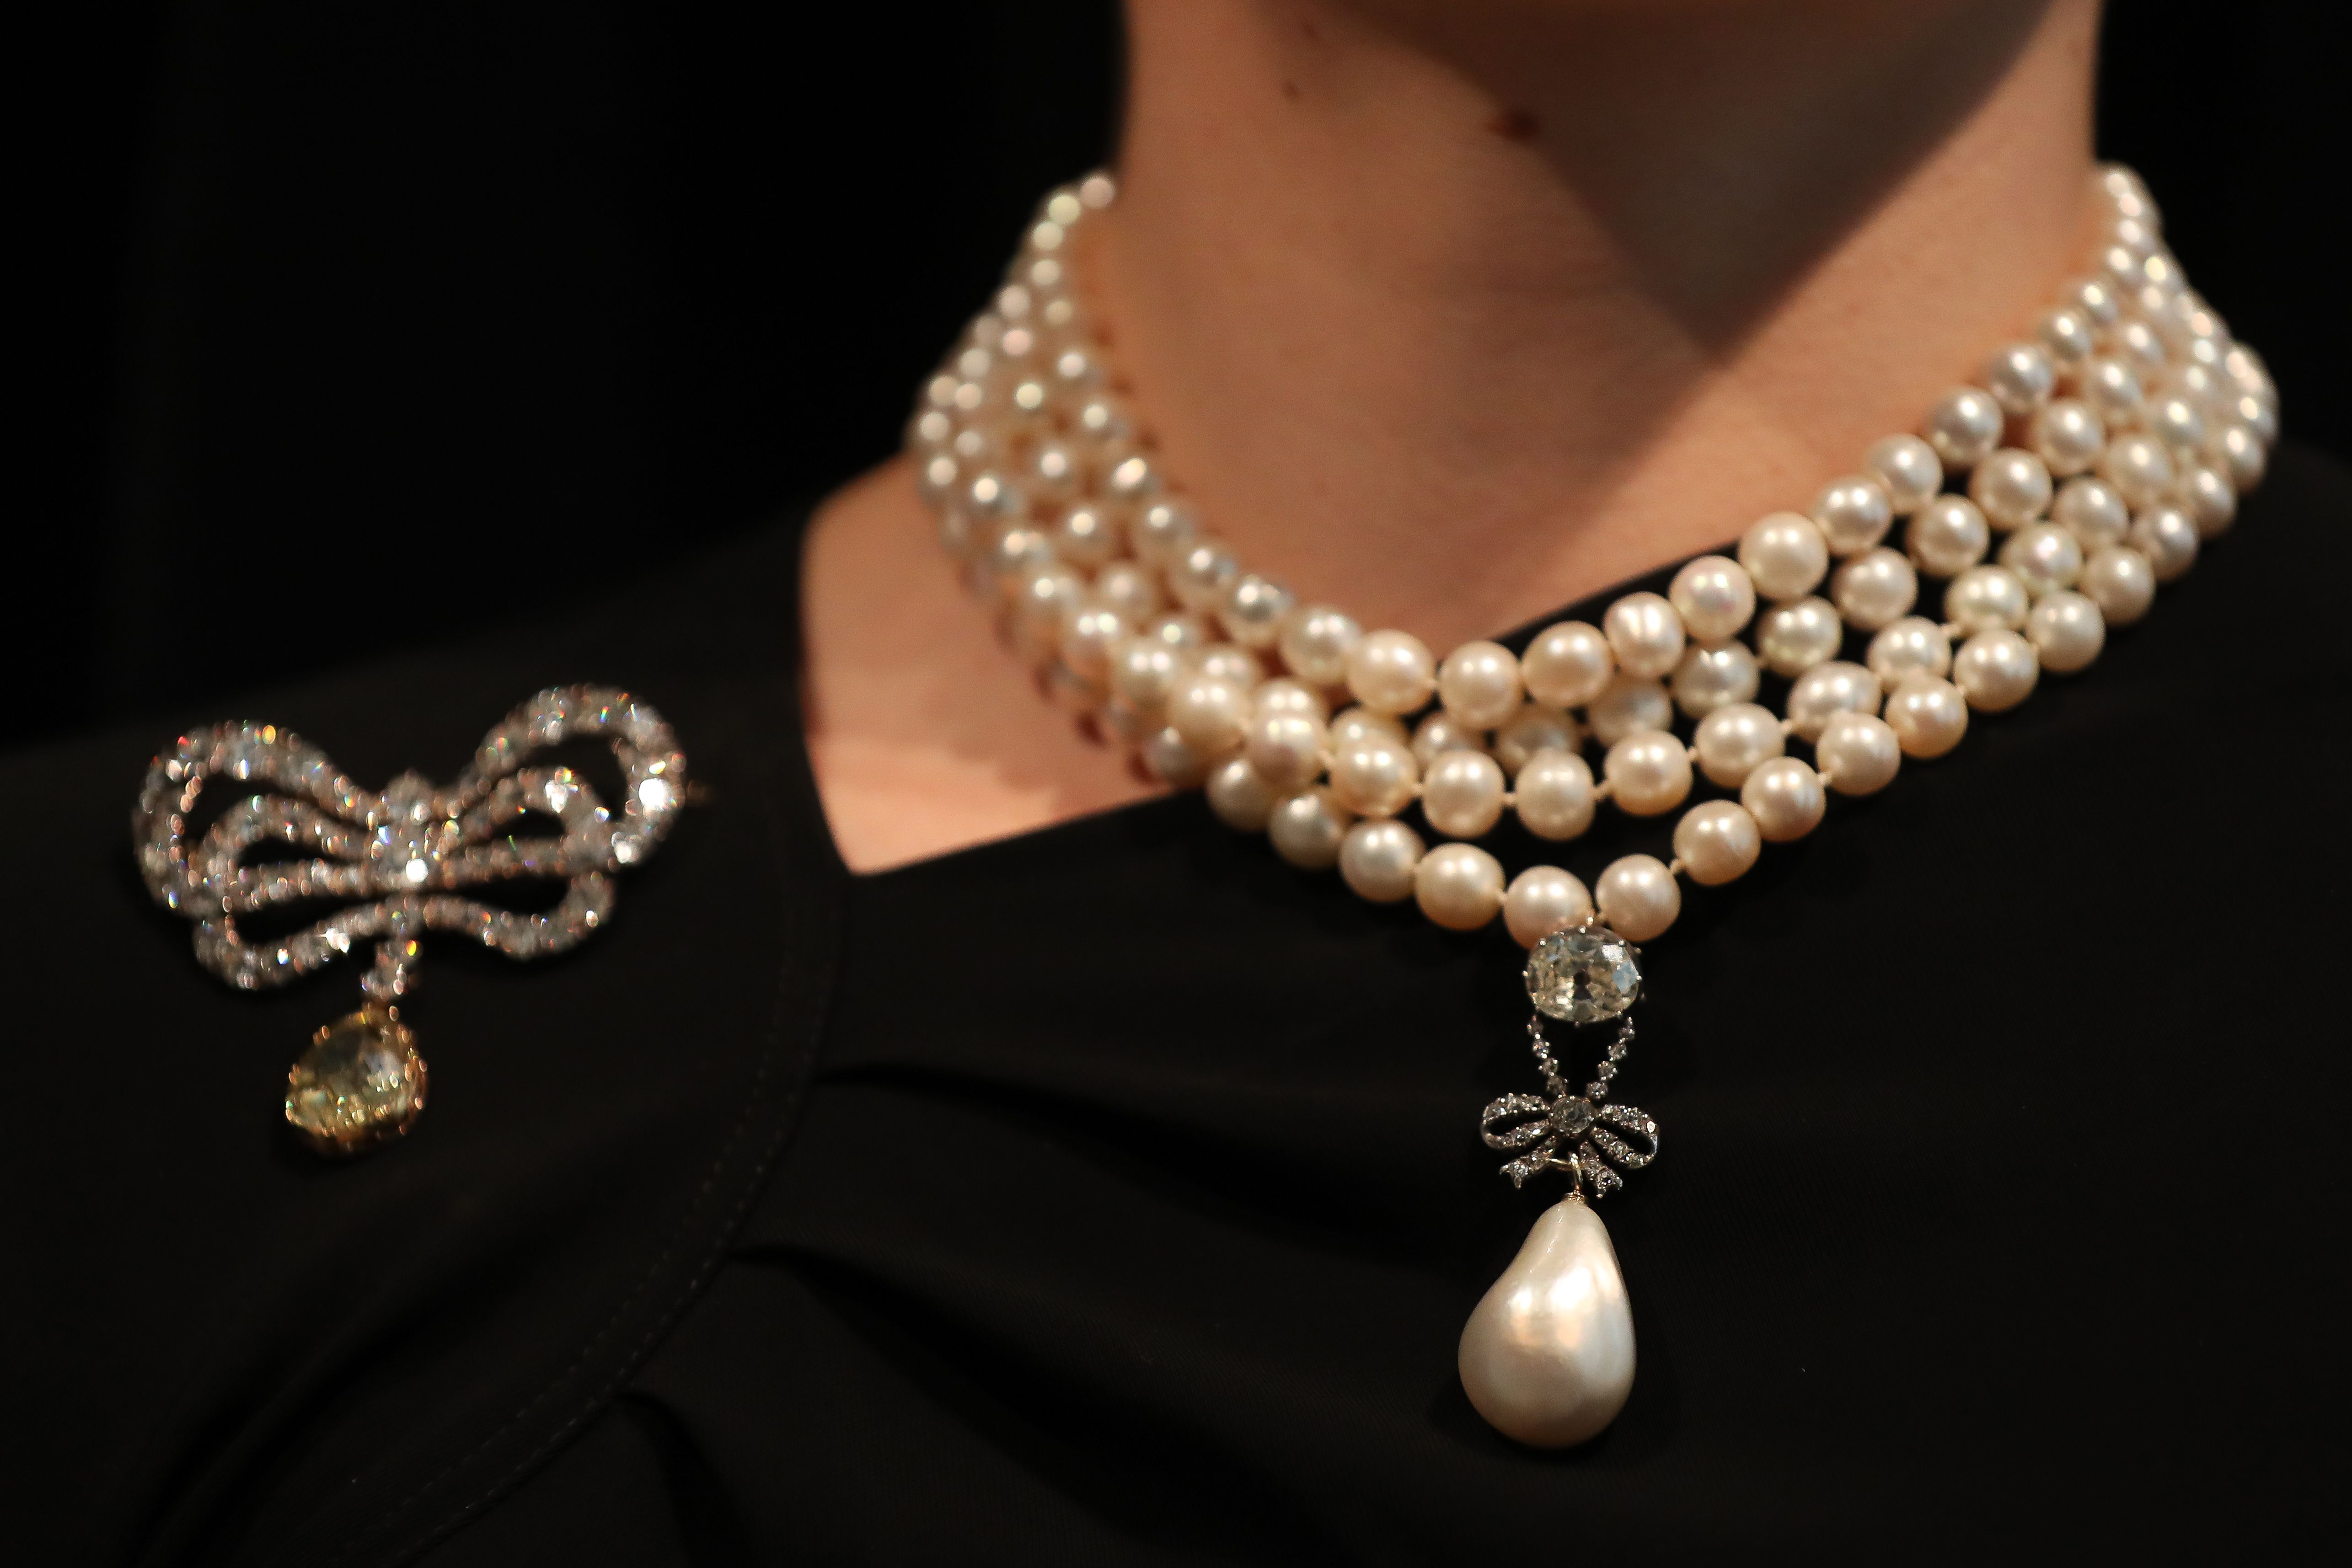 How a Scandal Over a Diamond Necklace Cost Marie Antoinette Her